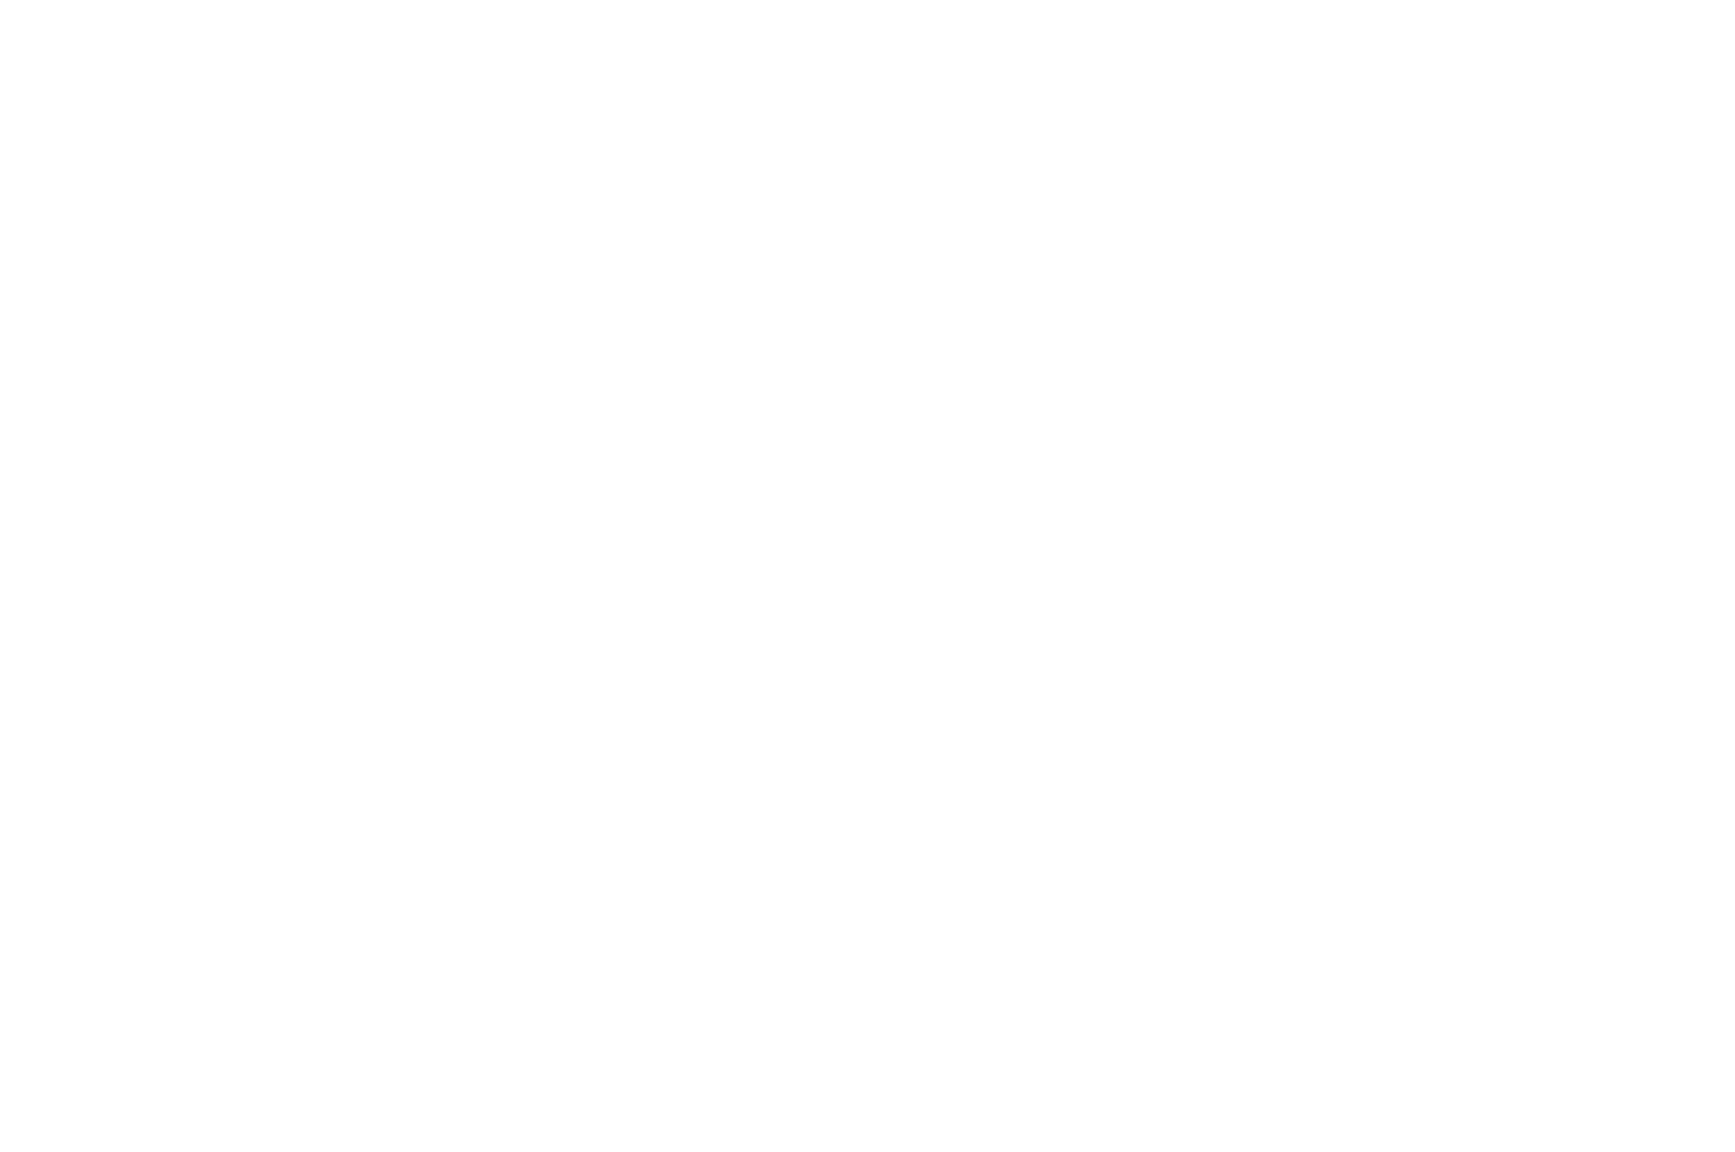 OFFICIAL SELECTION - British Urban Film Festival - 2021 (1)